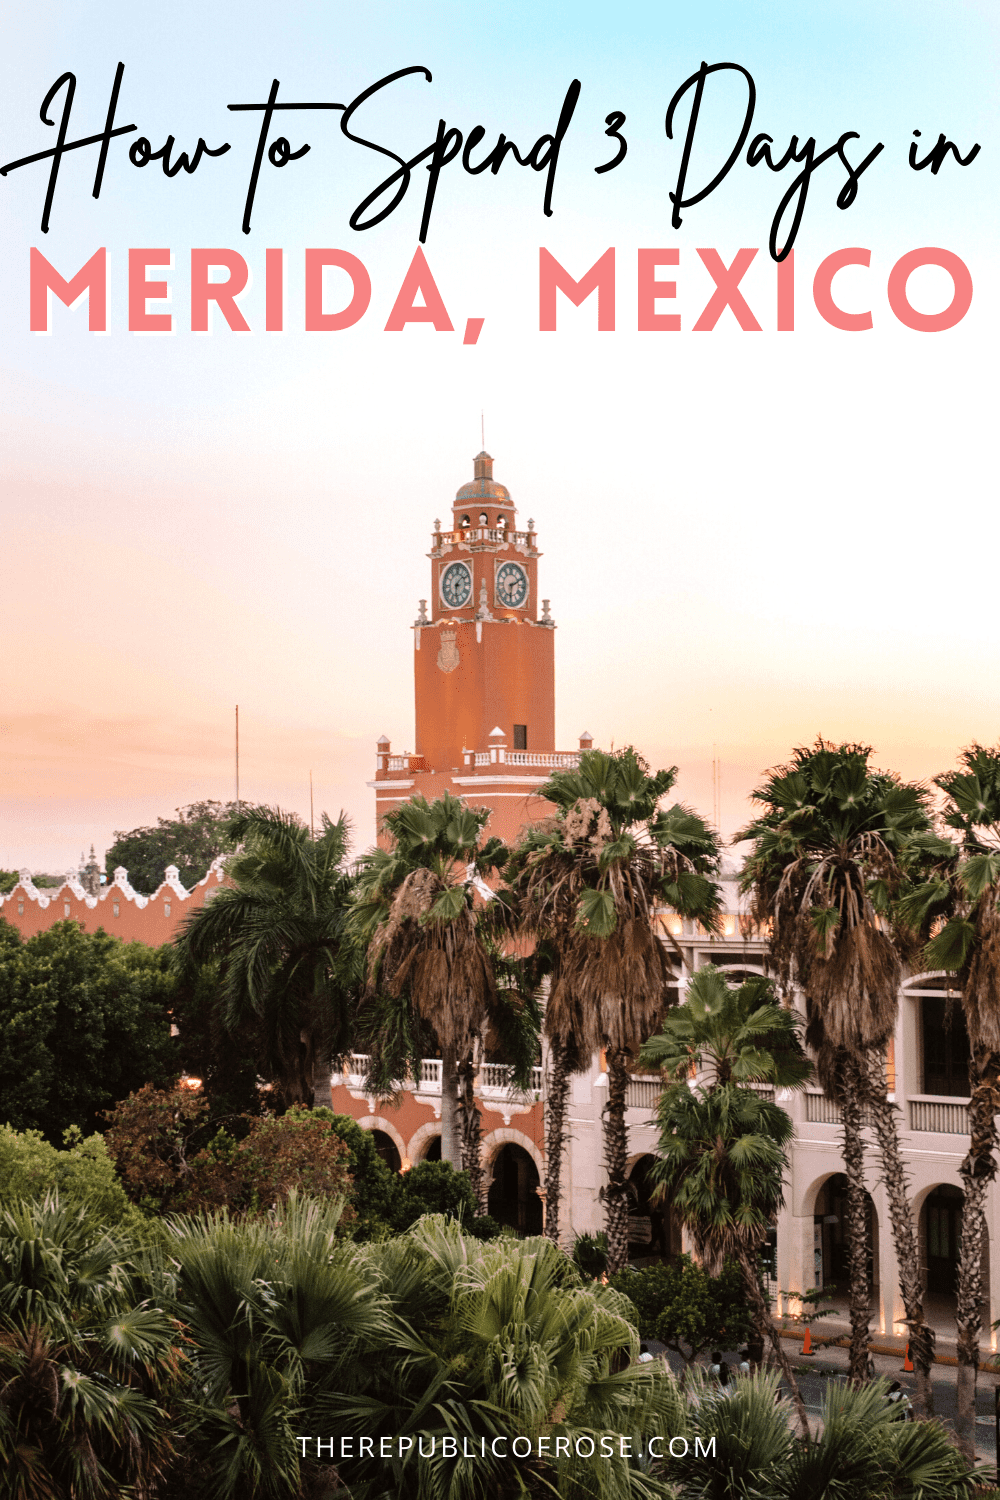 How to Spend 3 Days in Merida, Mexico